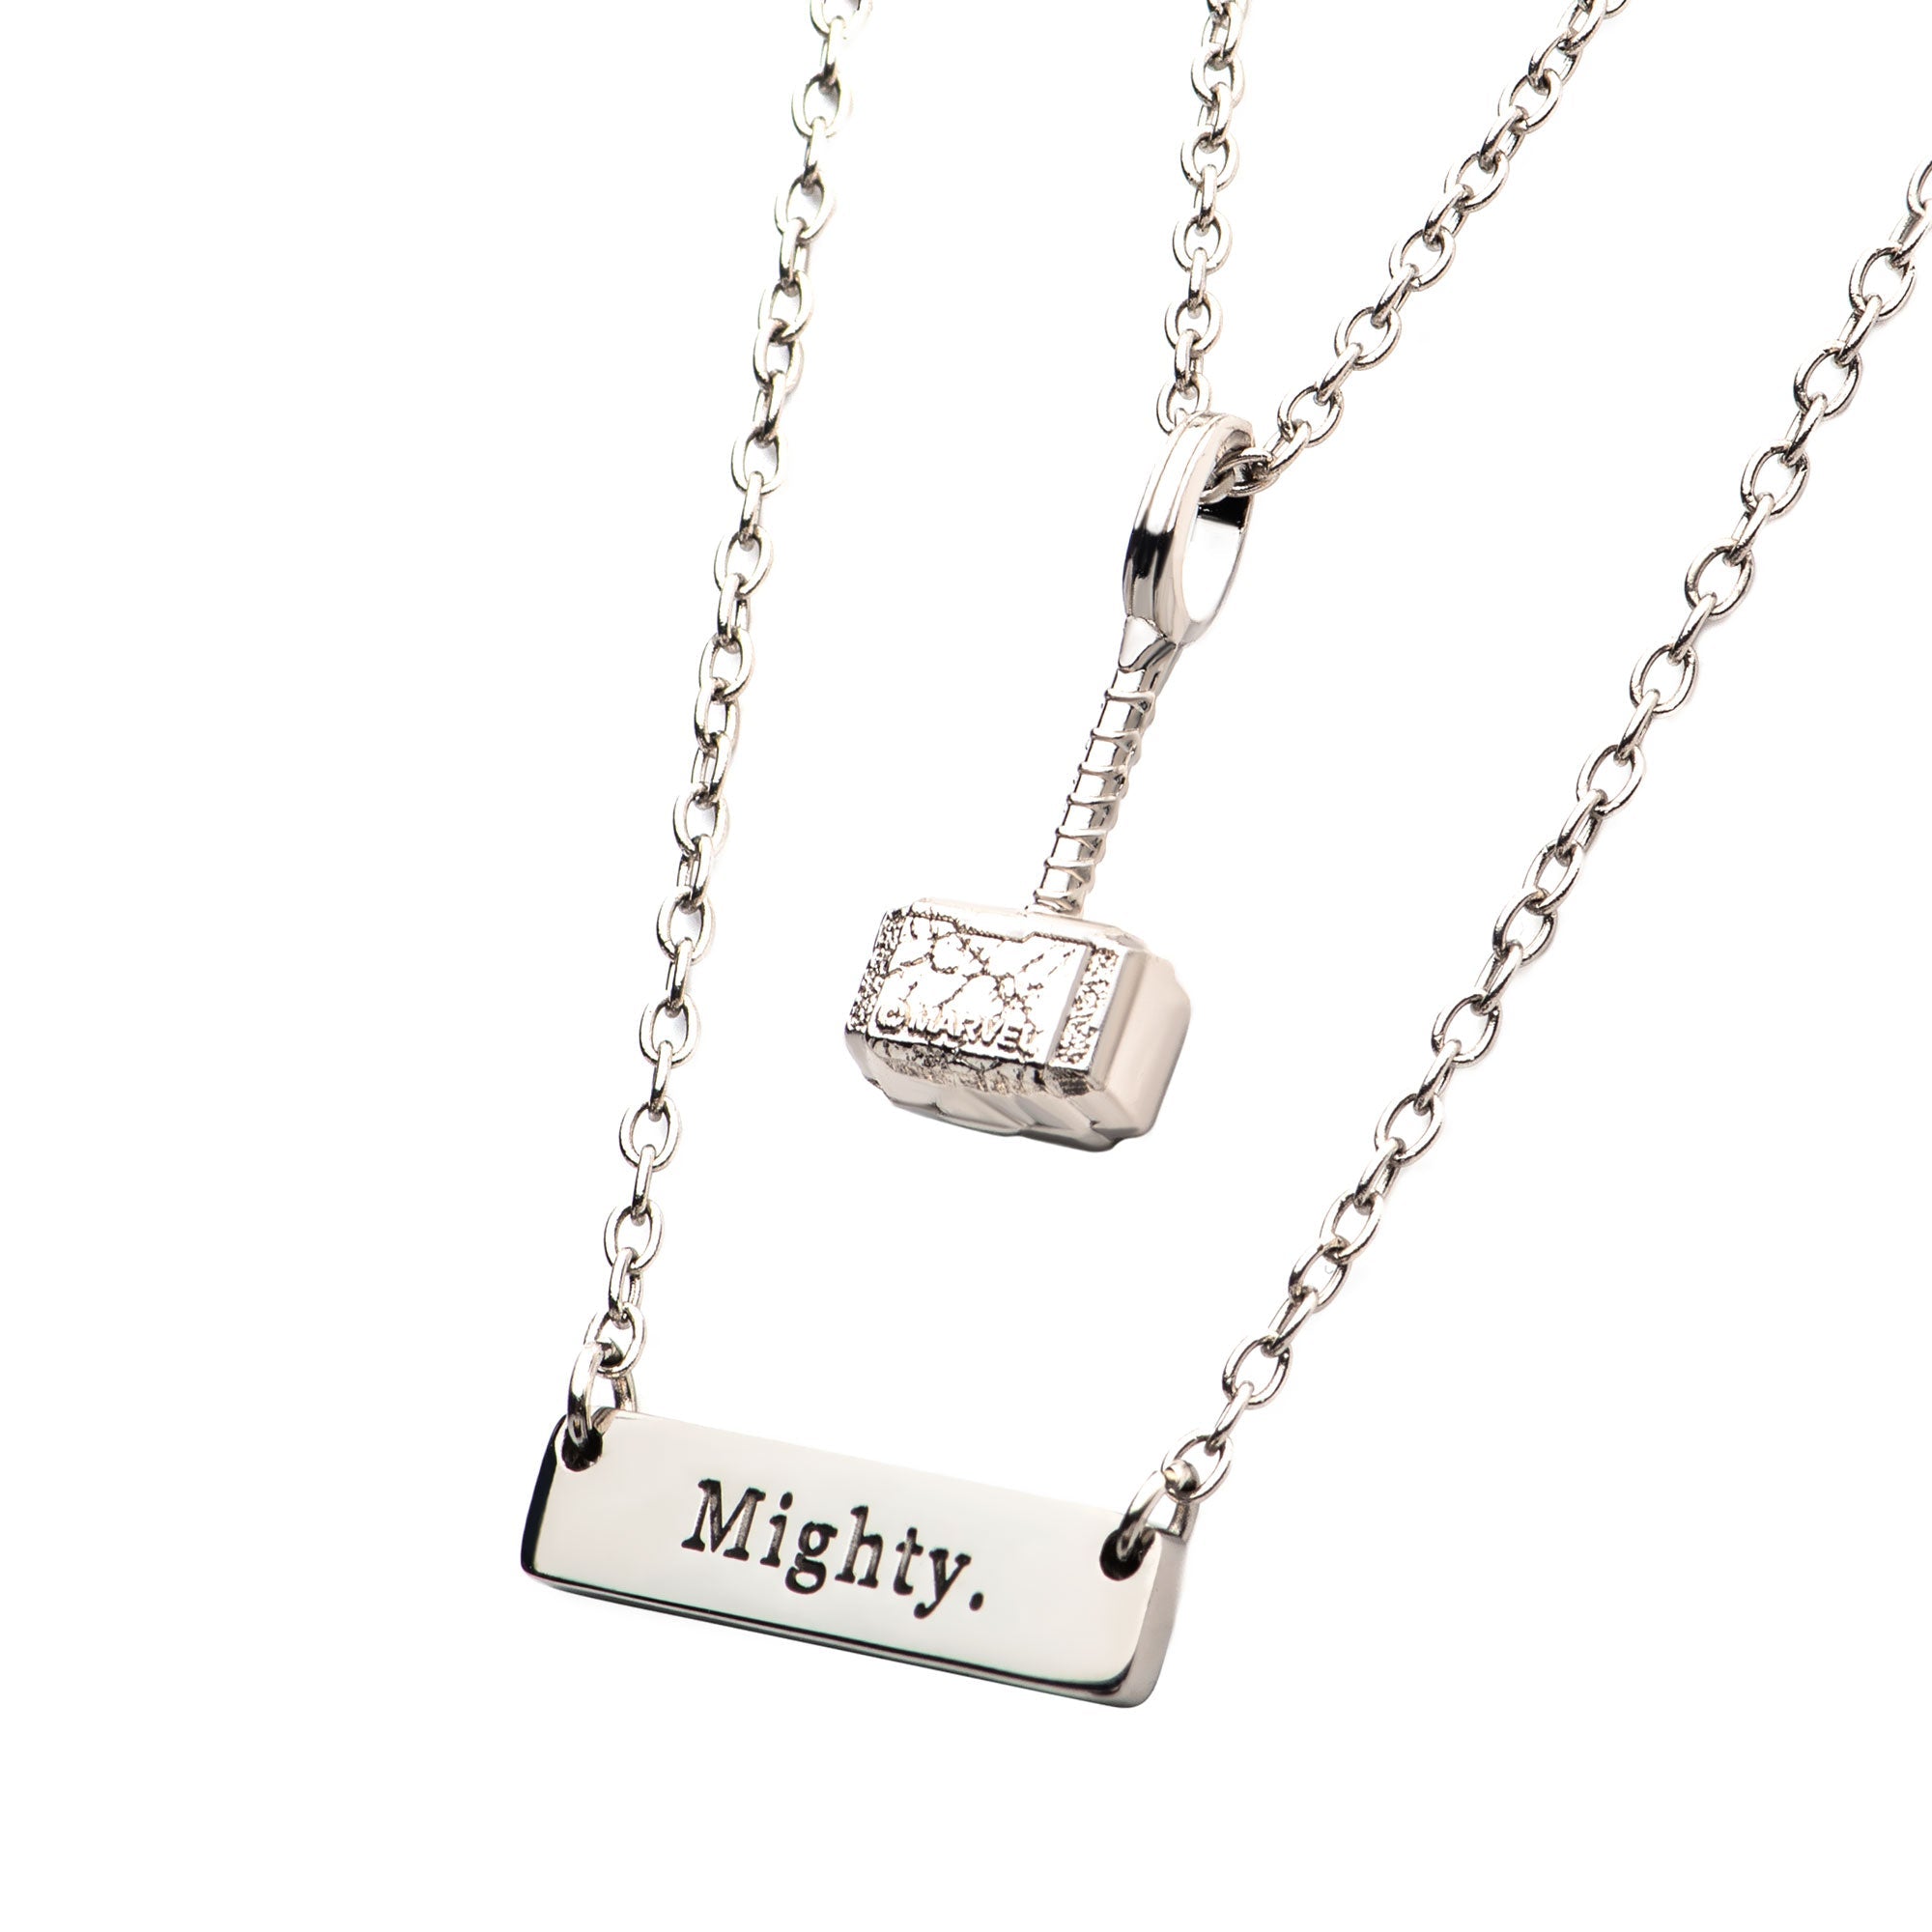 Marvel Hammer and Mighty Thor Tiered Necklace